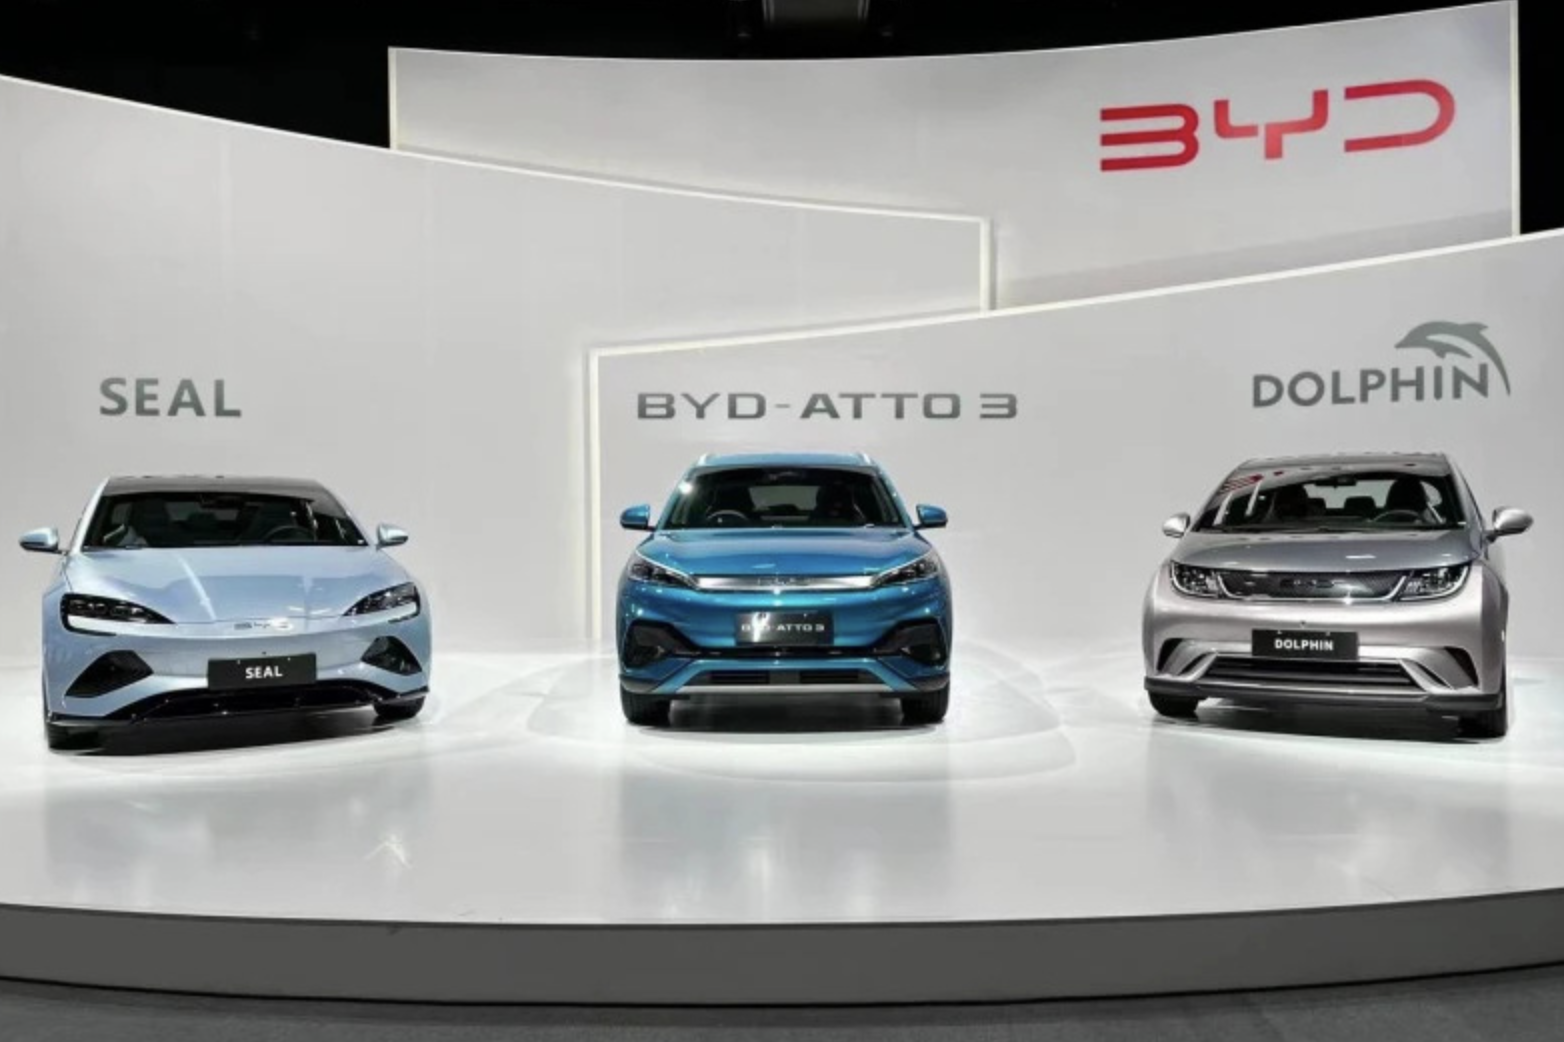 BYD’s three electric models, including the Atto 3, Dolphin, and Seal, will make their debut in Vietnam. Photo: BYD